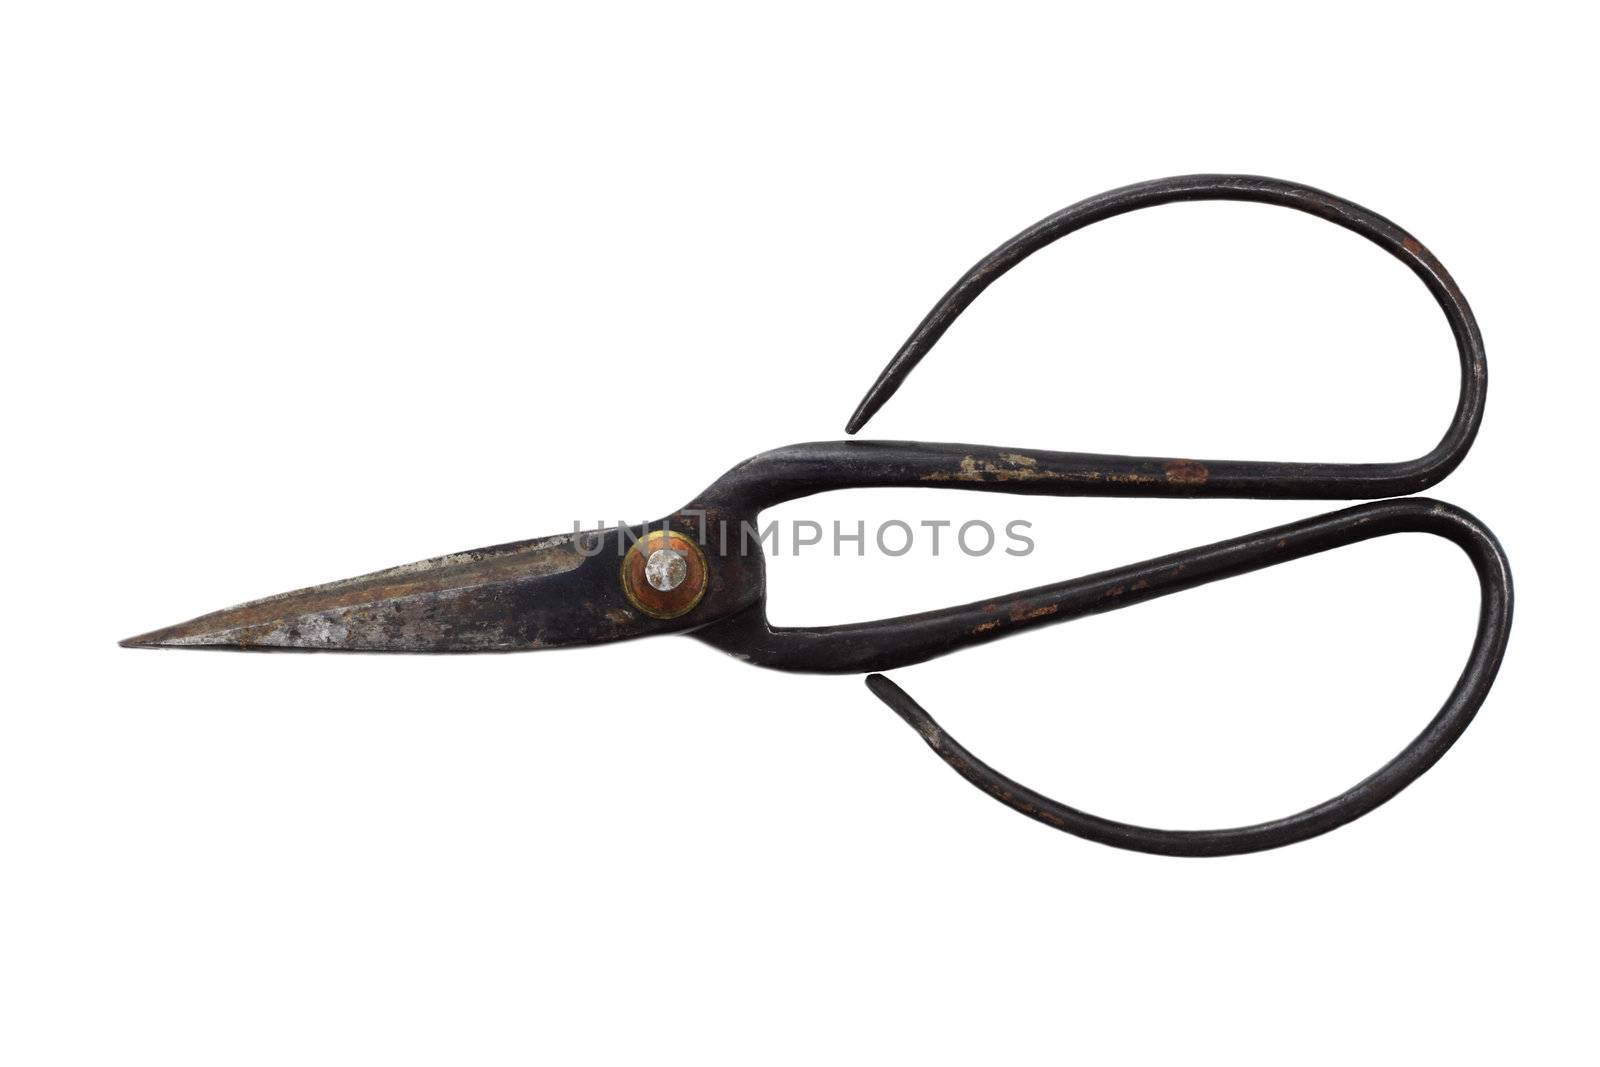 Antique Japanese Pruning Scissors by StephanieFrey